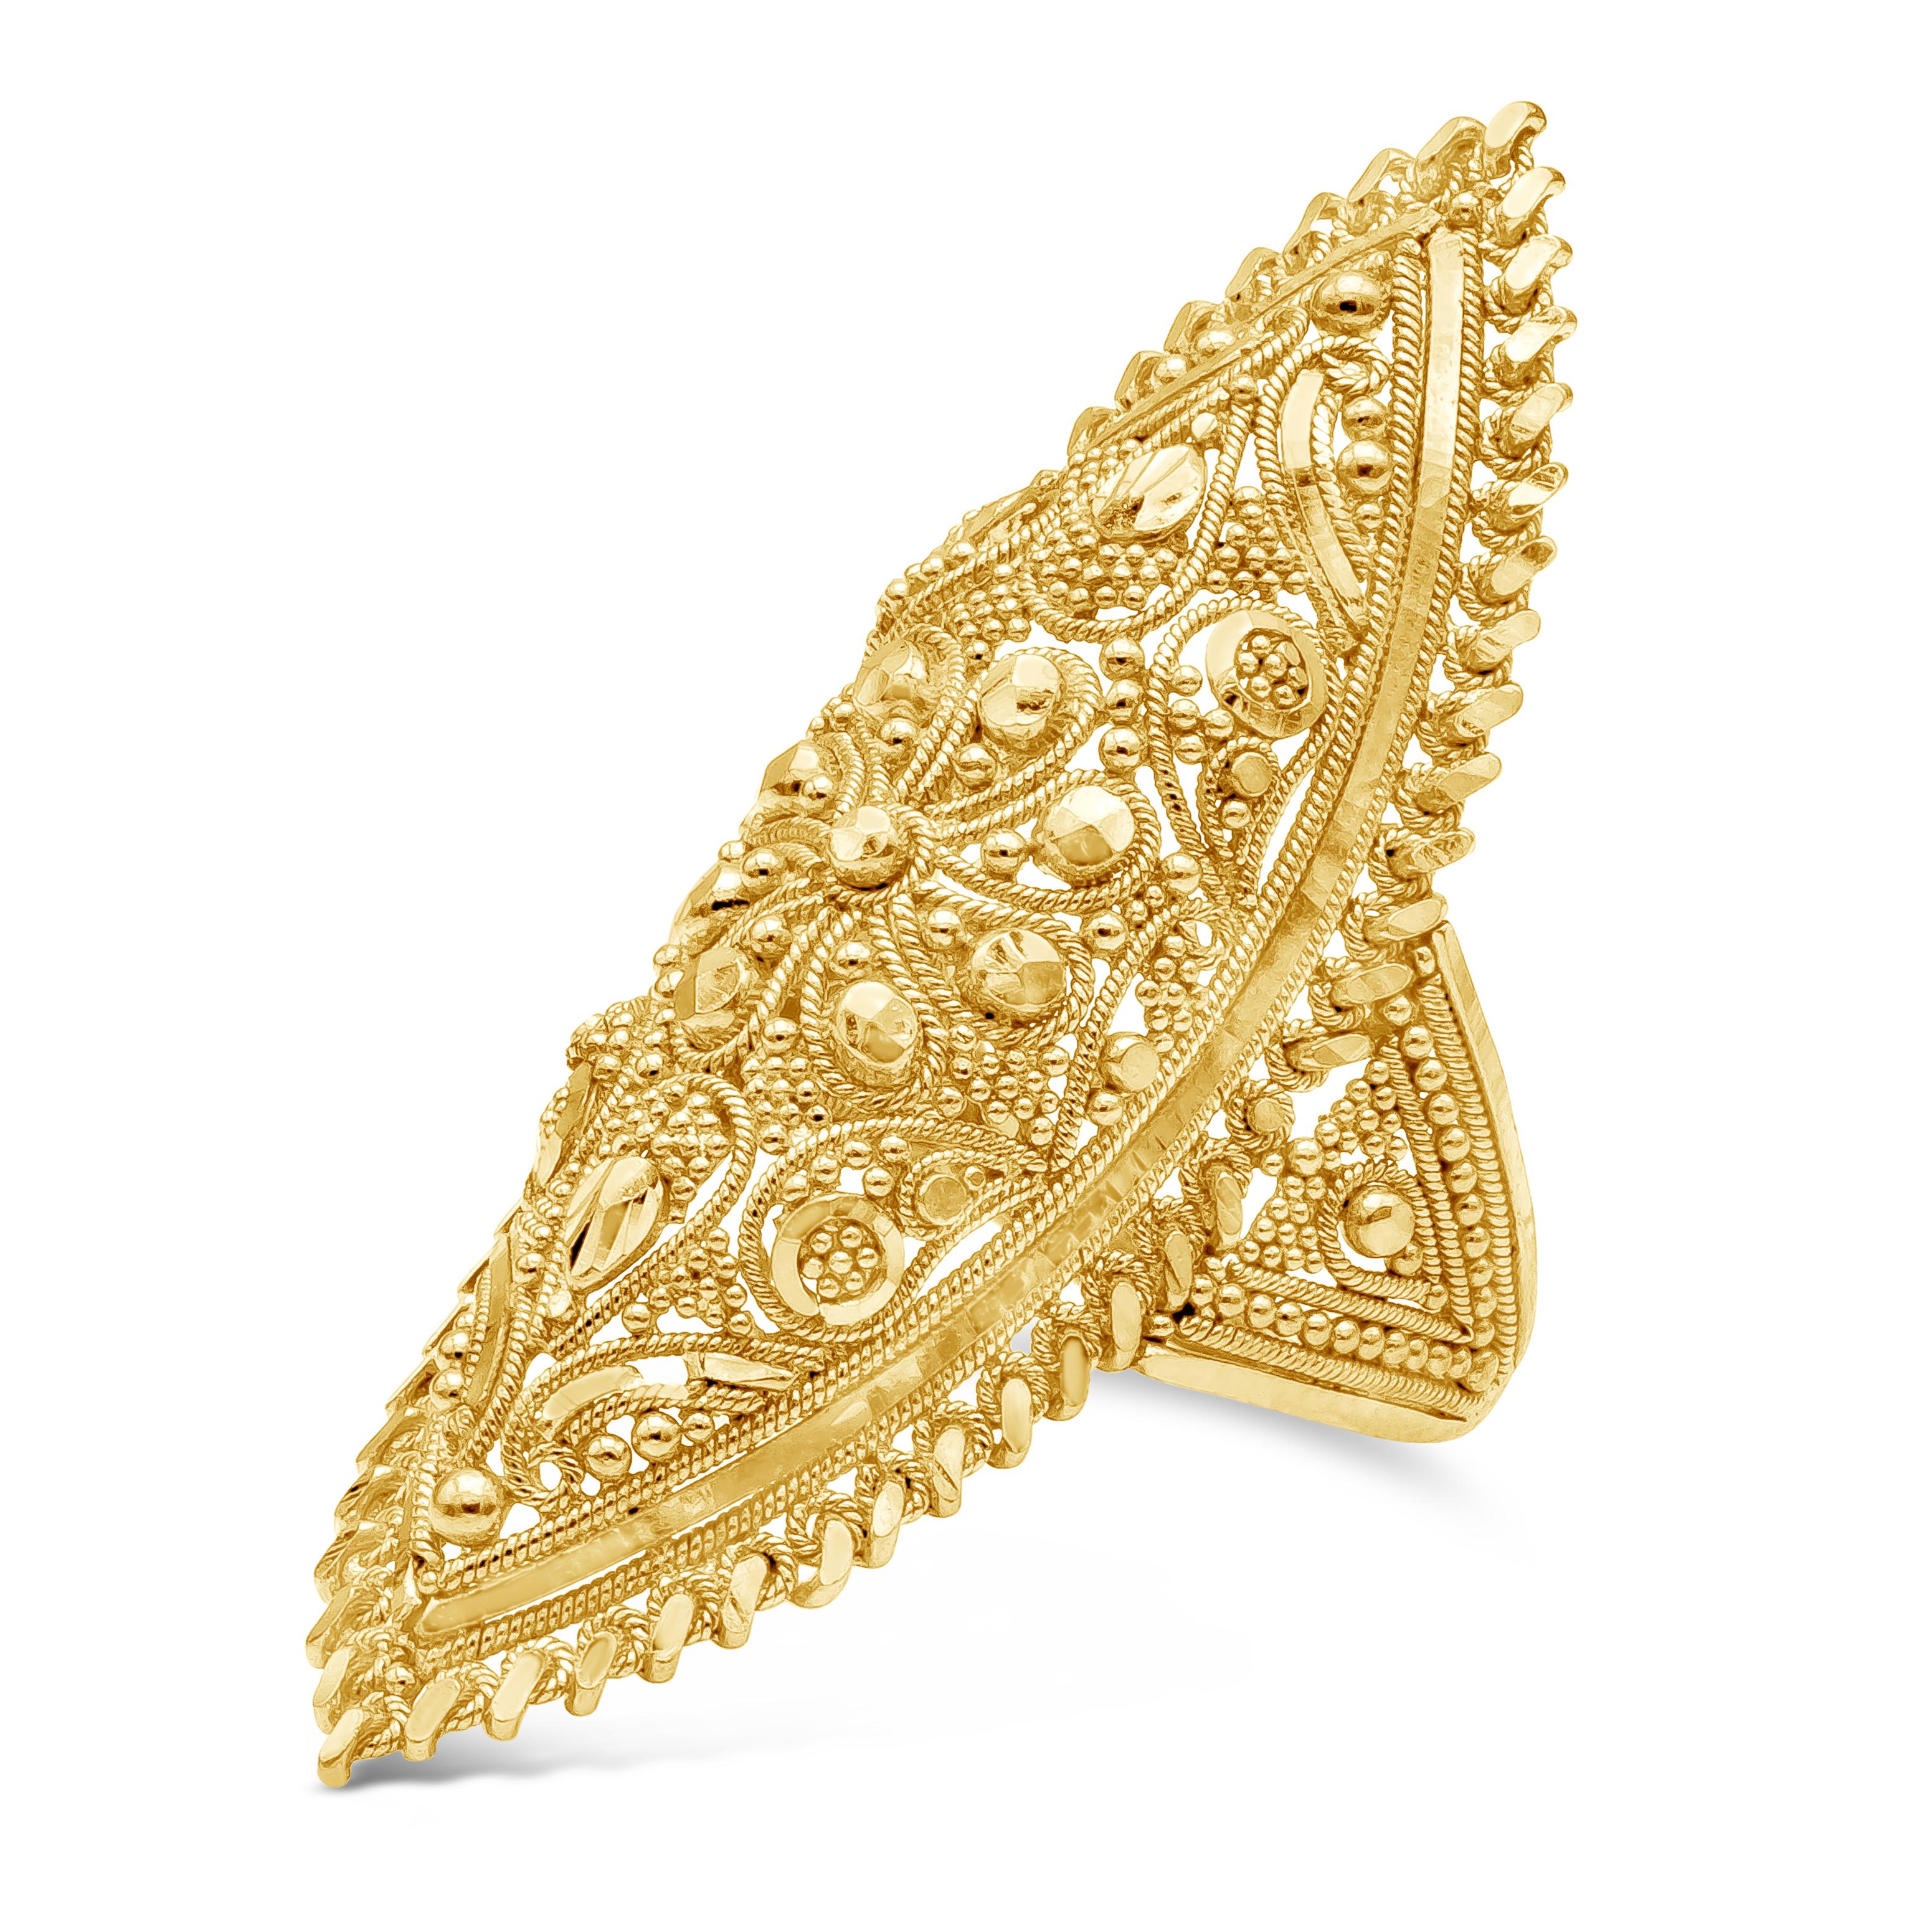 An elongated antique ornate fashion ring showcasing a distinct east asia design. Made with 24K Yellow Gold. 9.37 Grams of Gold, Size 7.5 US